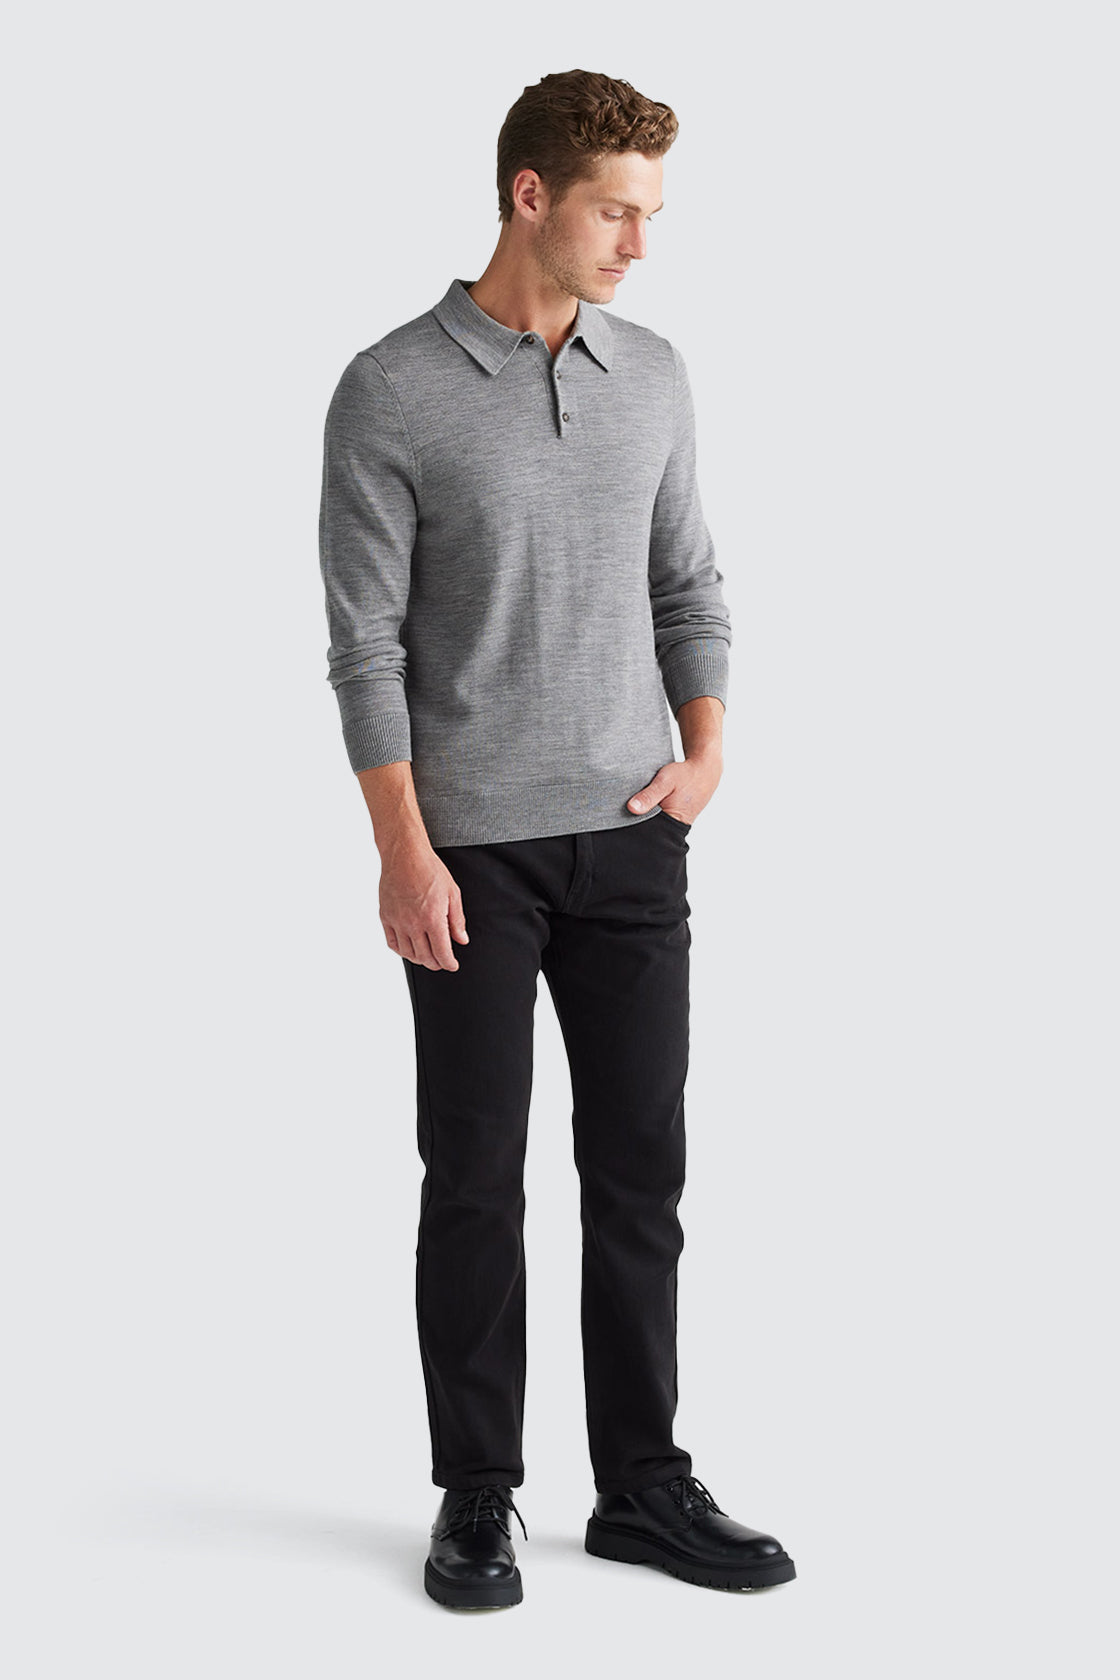 Toorallie Fine Knit Polo Mid Grey